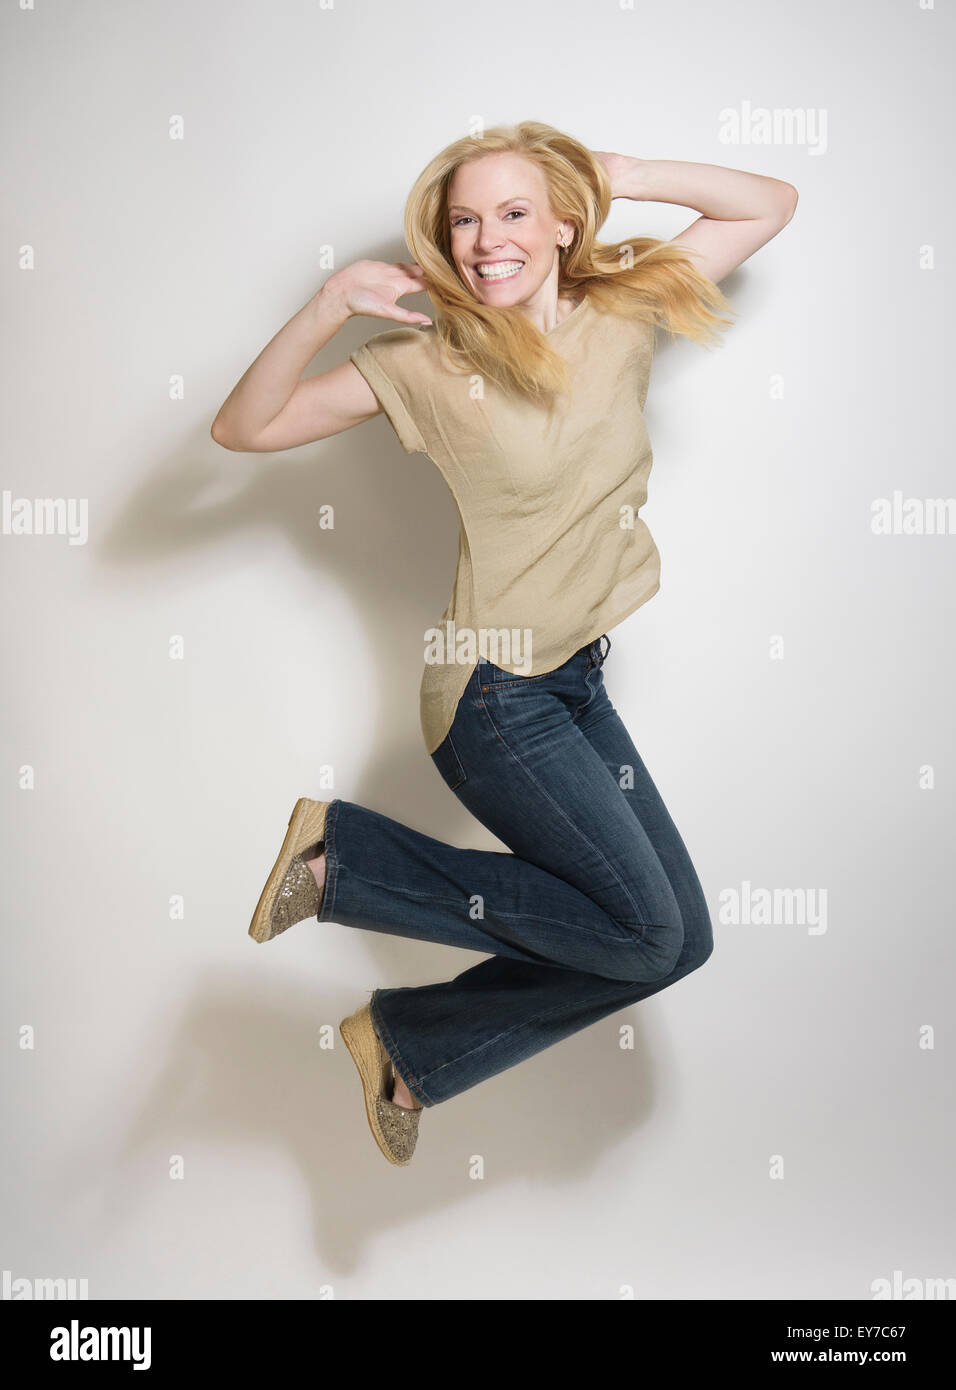 Portrait of mid-adult woman jumping Stock Photo